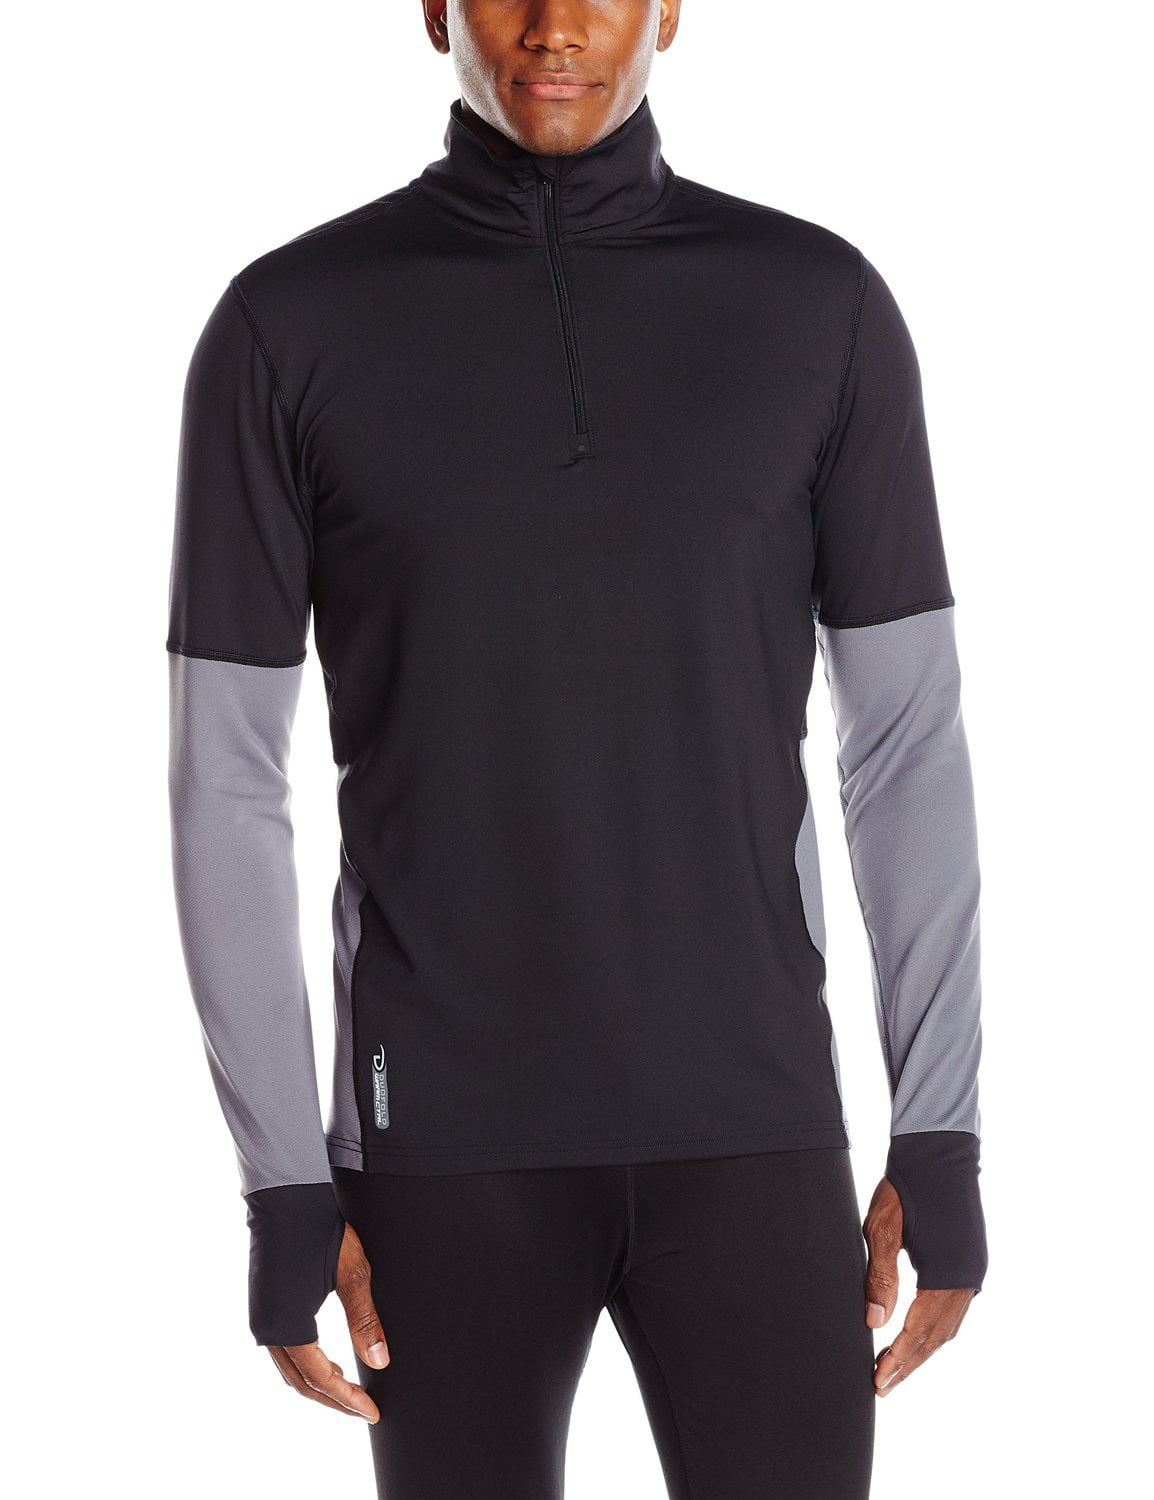 Duofold by Champion THERMatrix Men’s 1/4 Zip Pullover, L, Black/Stormy ...